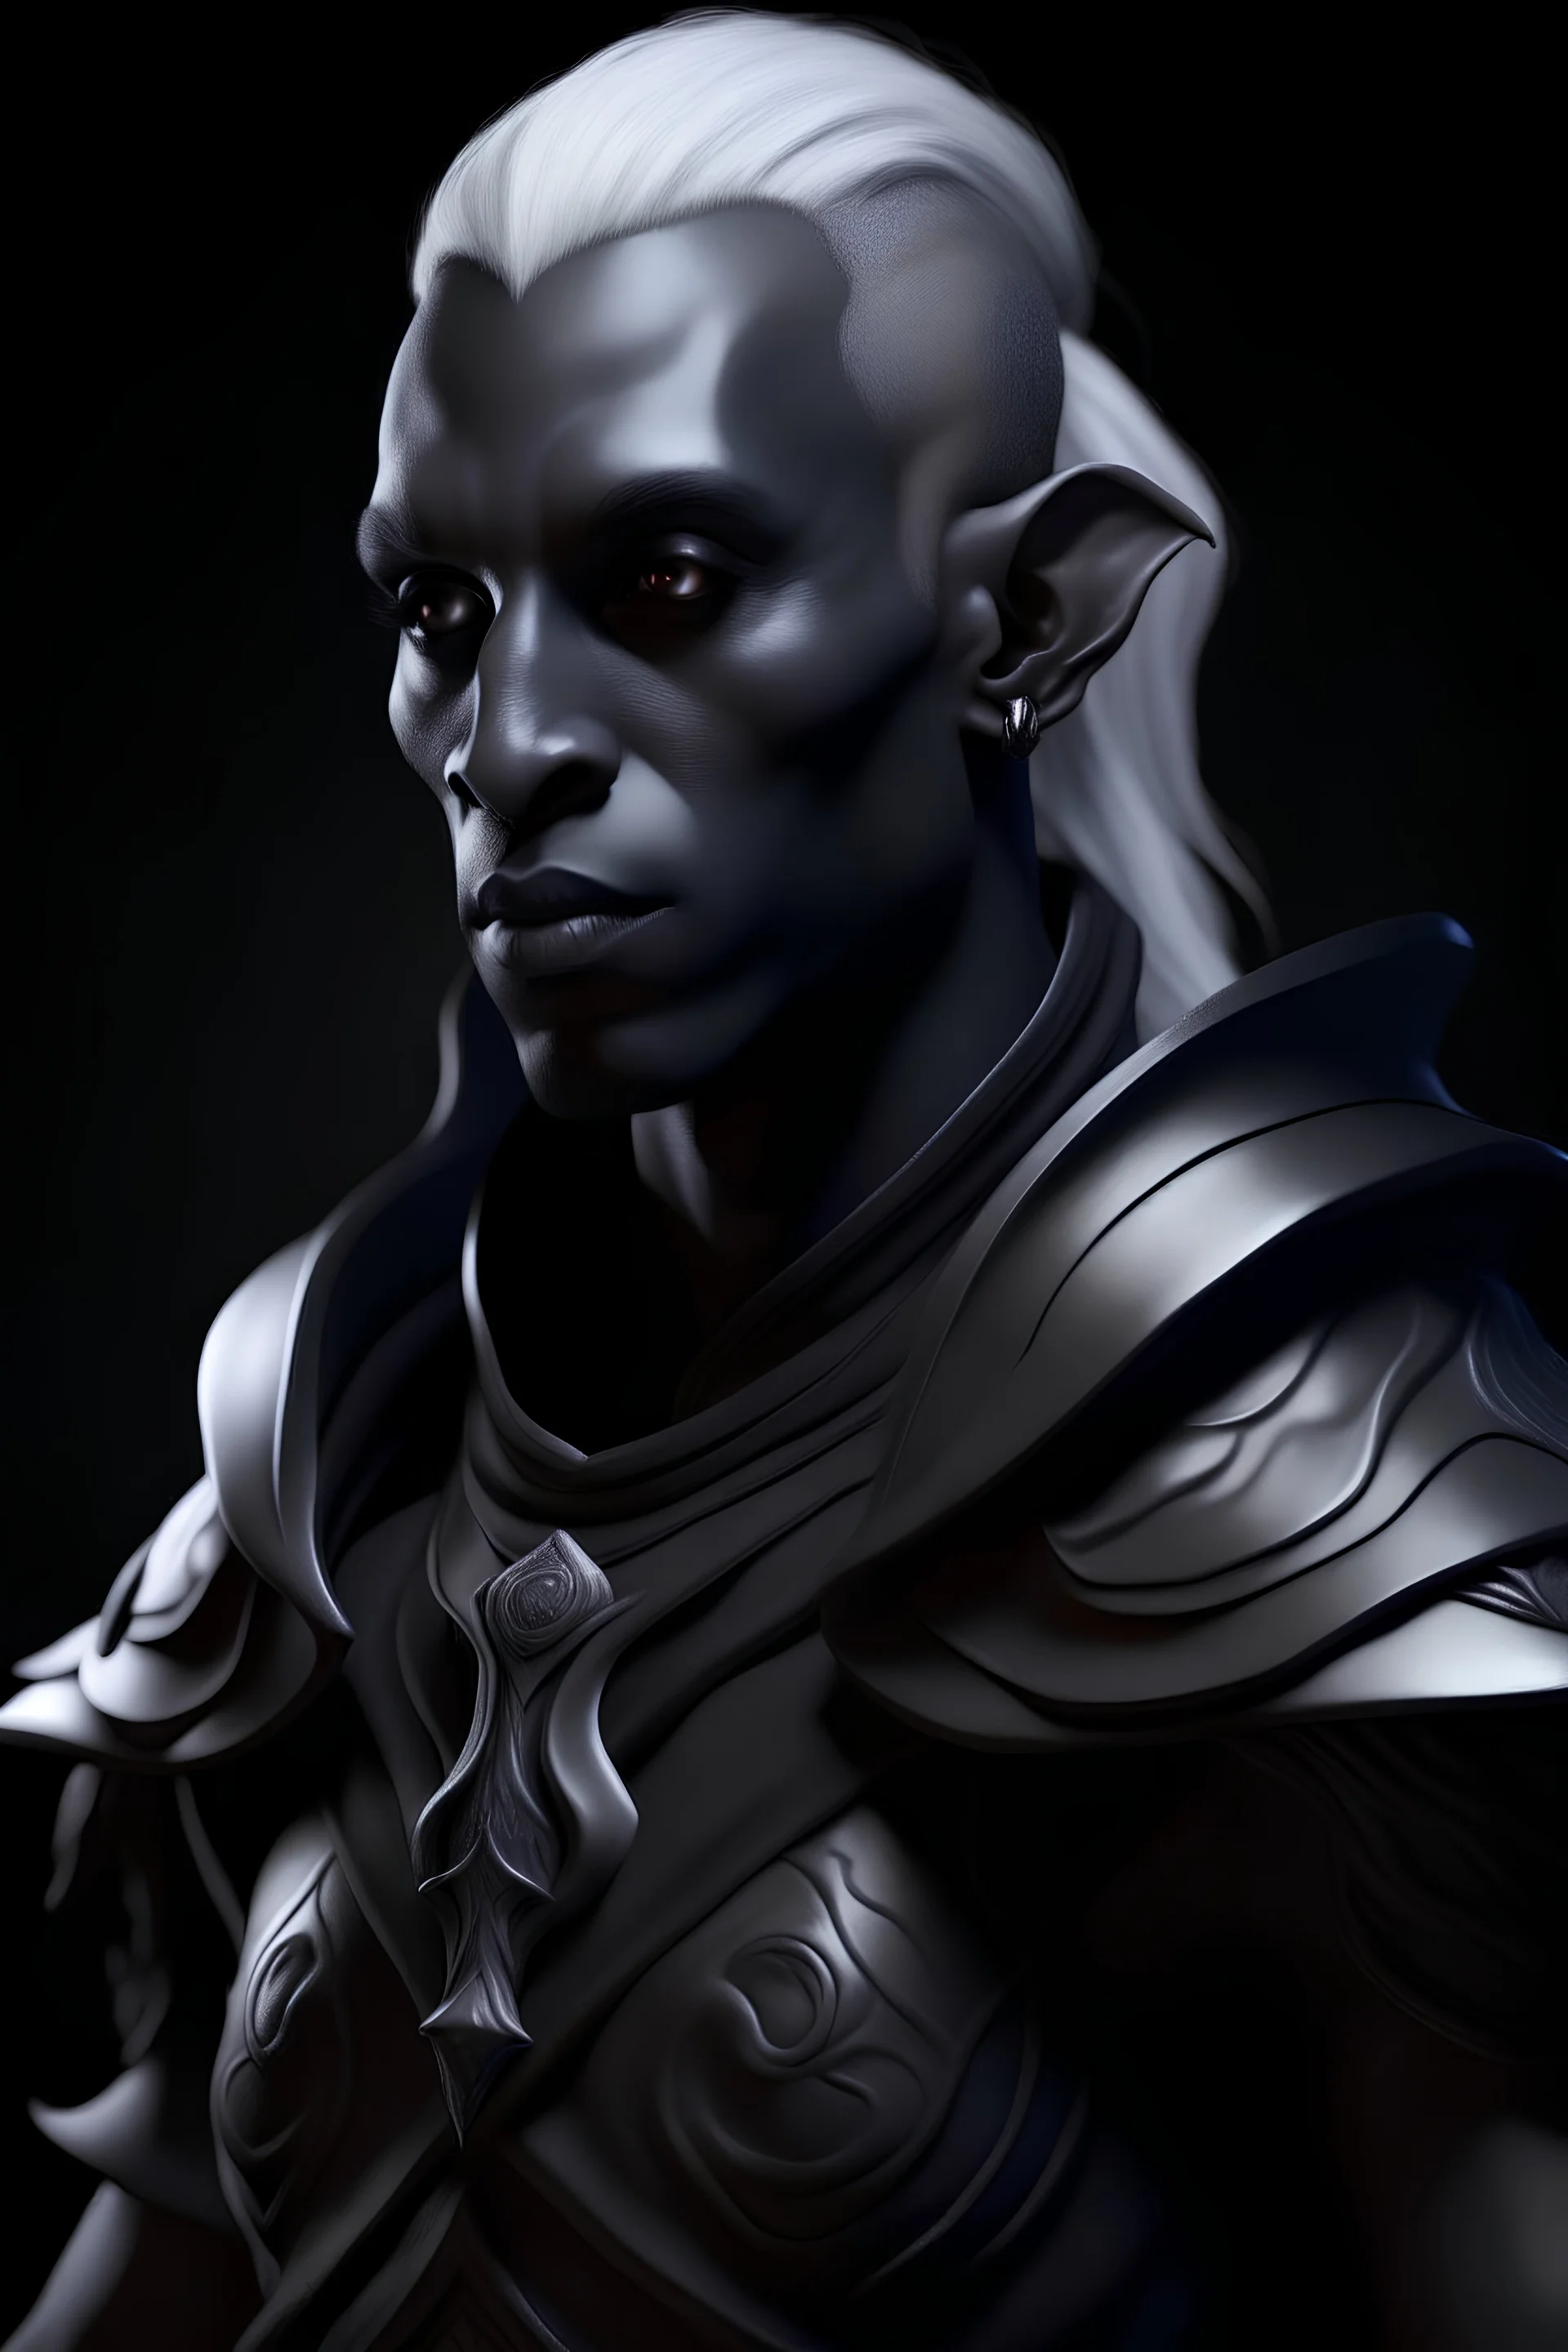 dnd character art of a drow. high resolution cgi, 4k, ears, dark-charcoal-gray skin, unreal engine 6, high detail, cinematic, male.